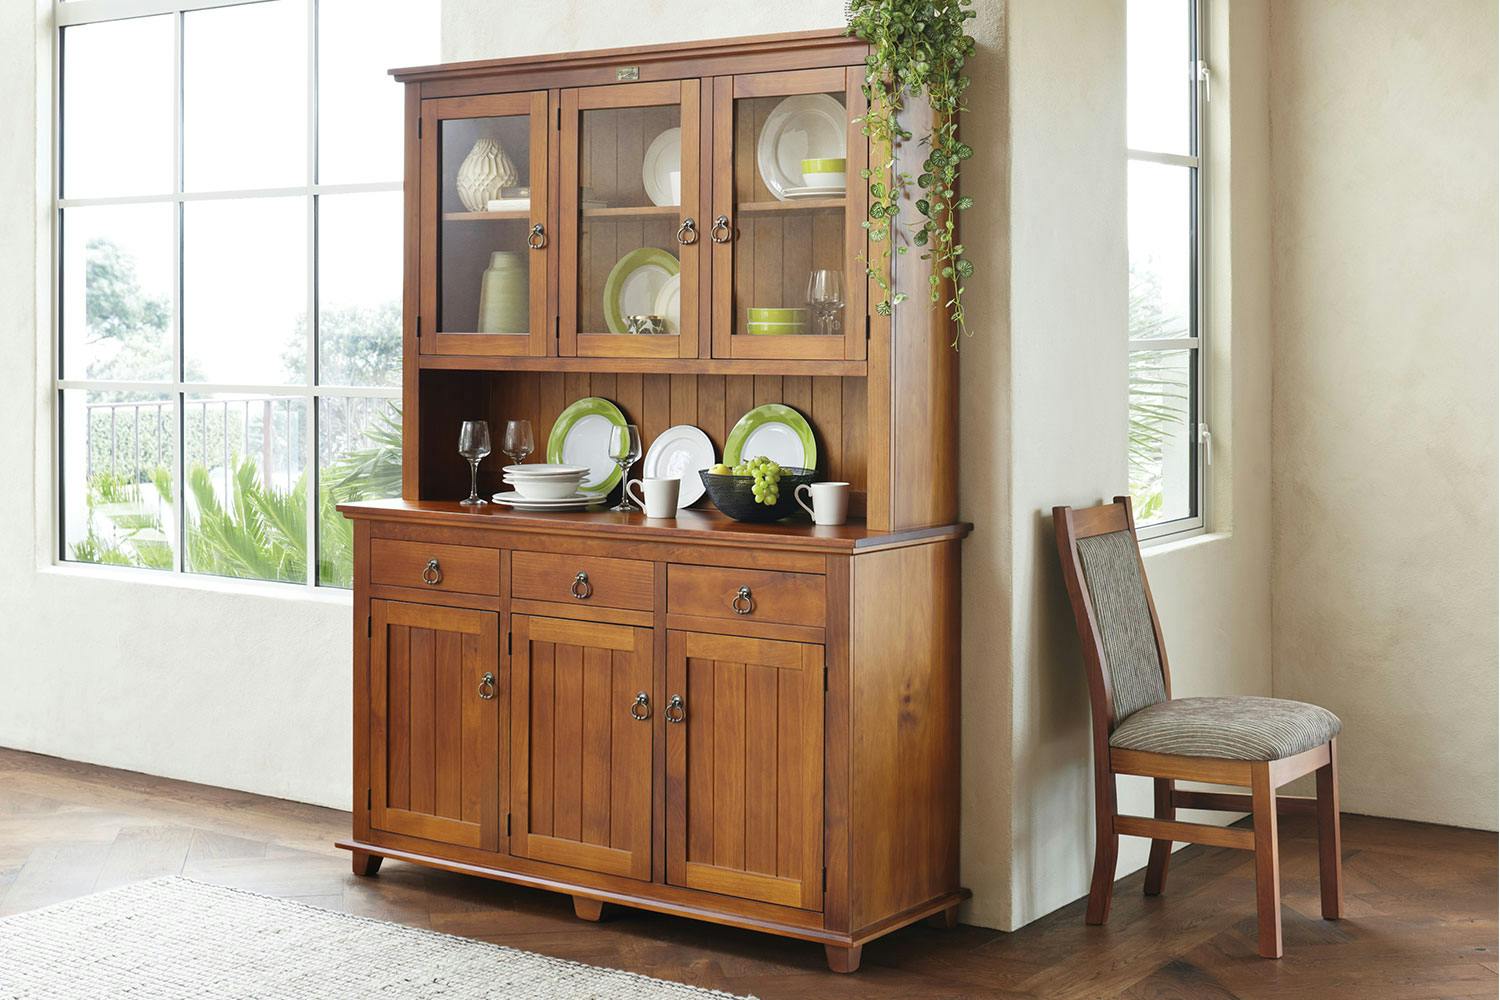 Ferngrove 3 Drawer Hutch by Coastwood Furniture Harvey Norman New Zealand